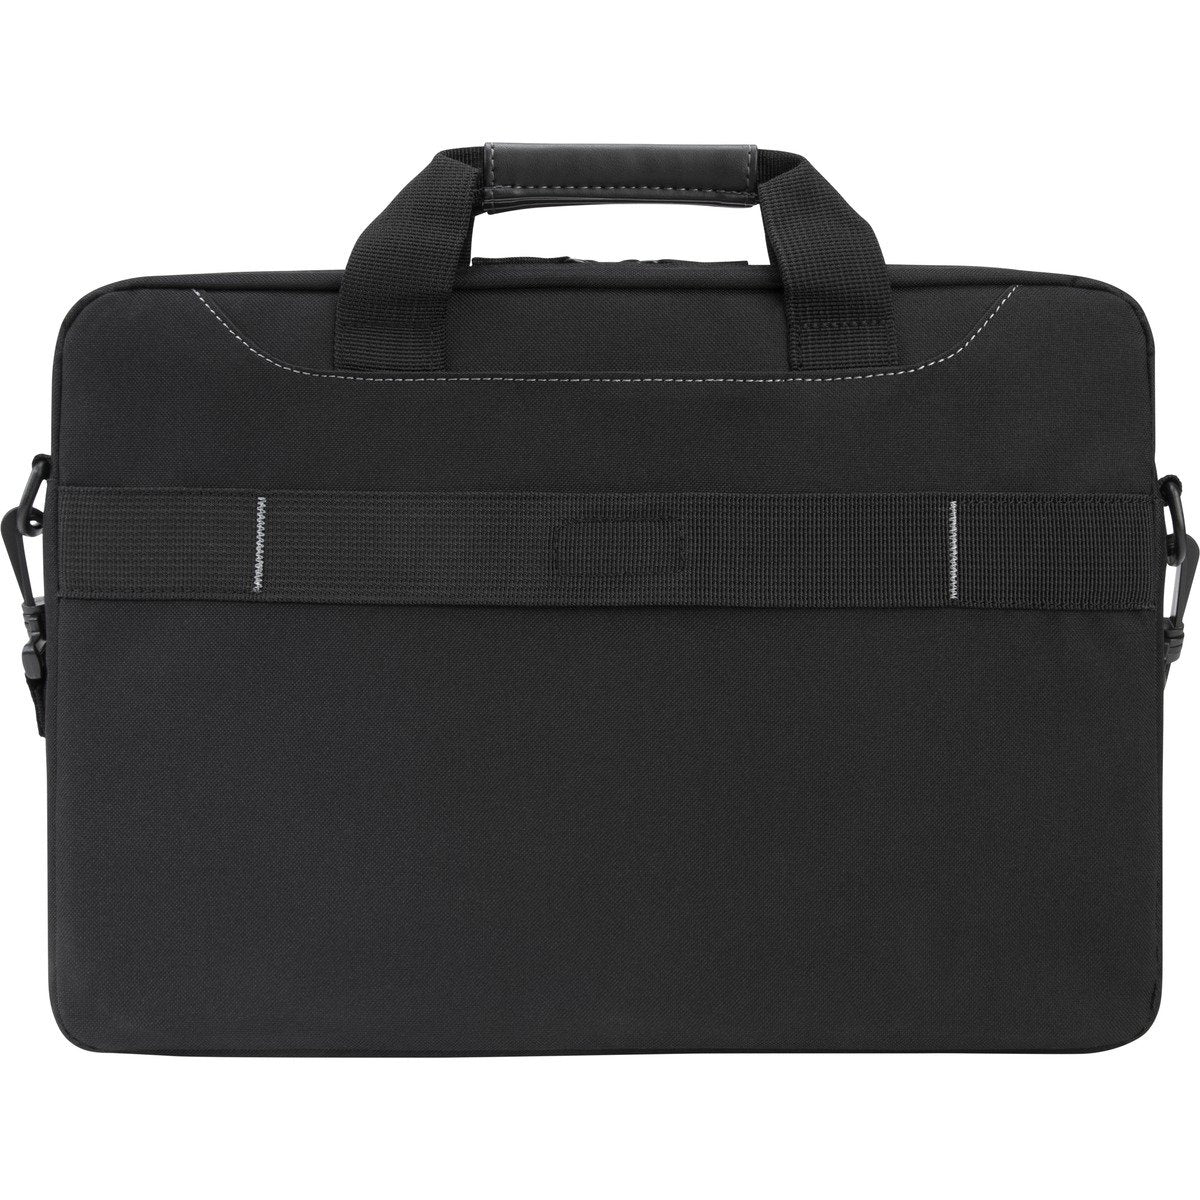 Targus TSS898 Business Casual 15.6-inch Laptop Briefcase - Black